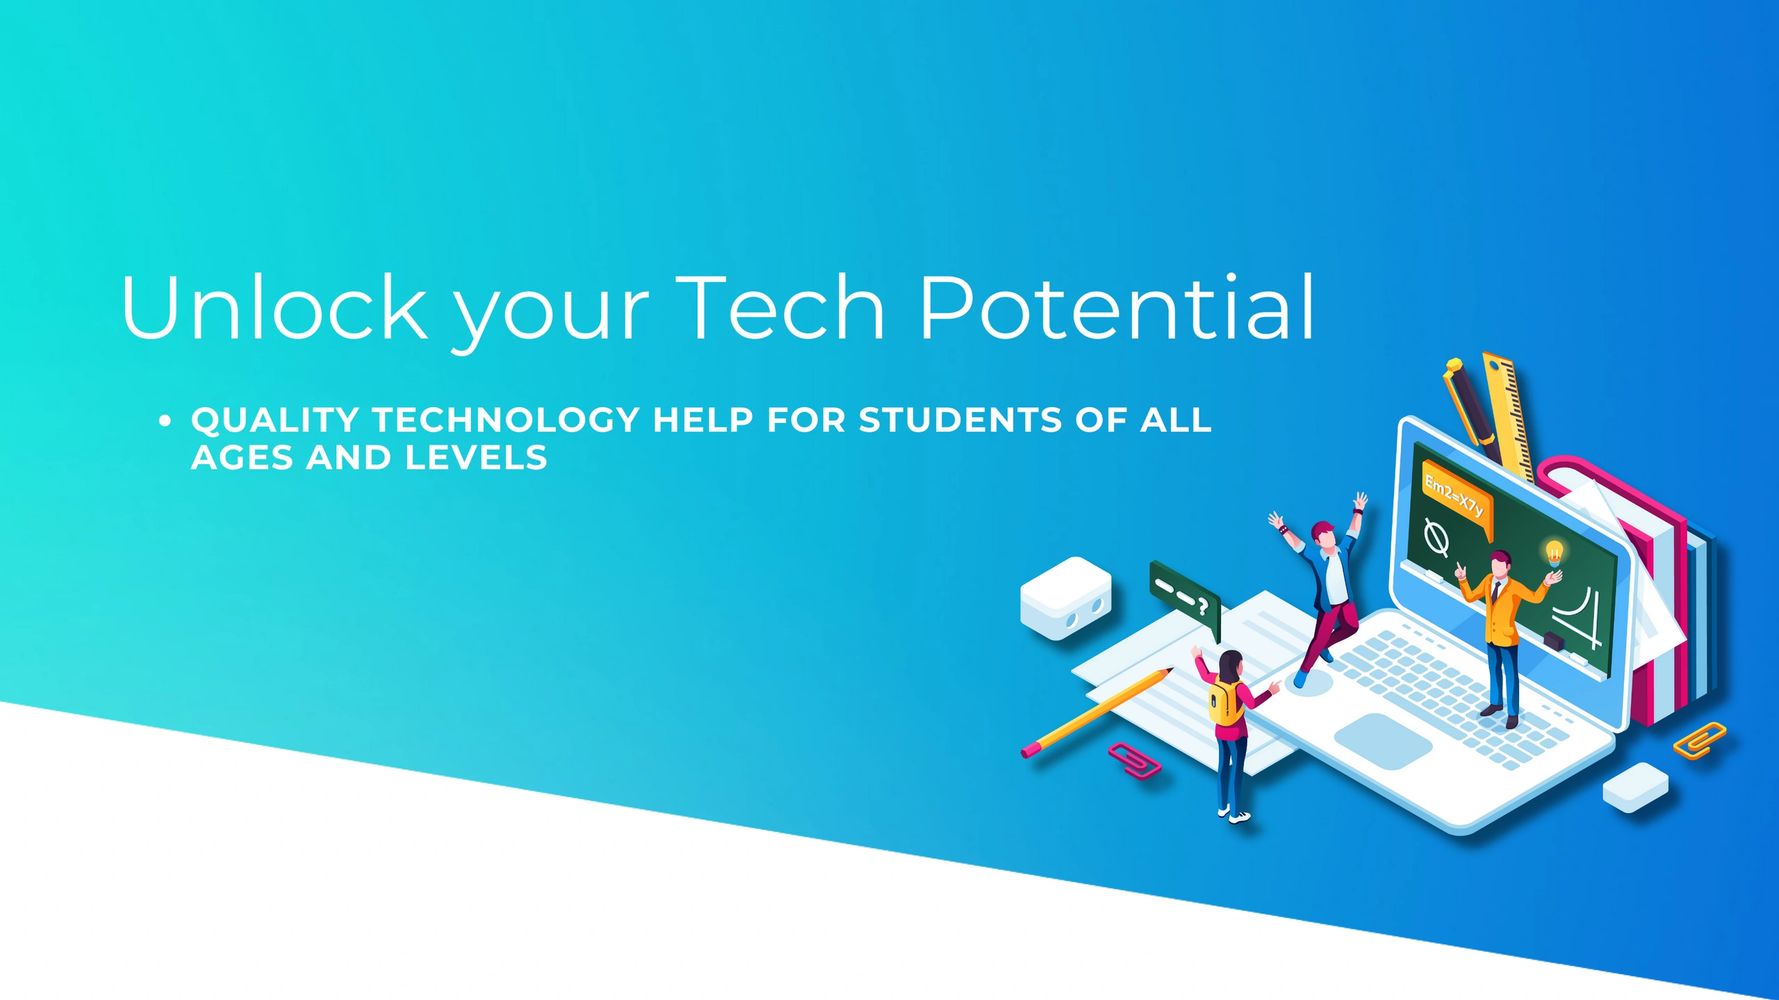 Unlock you Tech Potential. Quality technology help for students of all ages and levels.